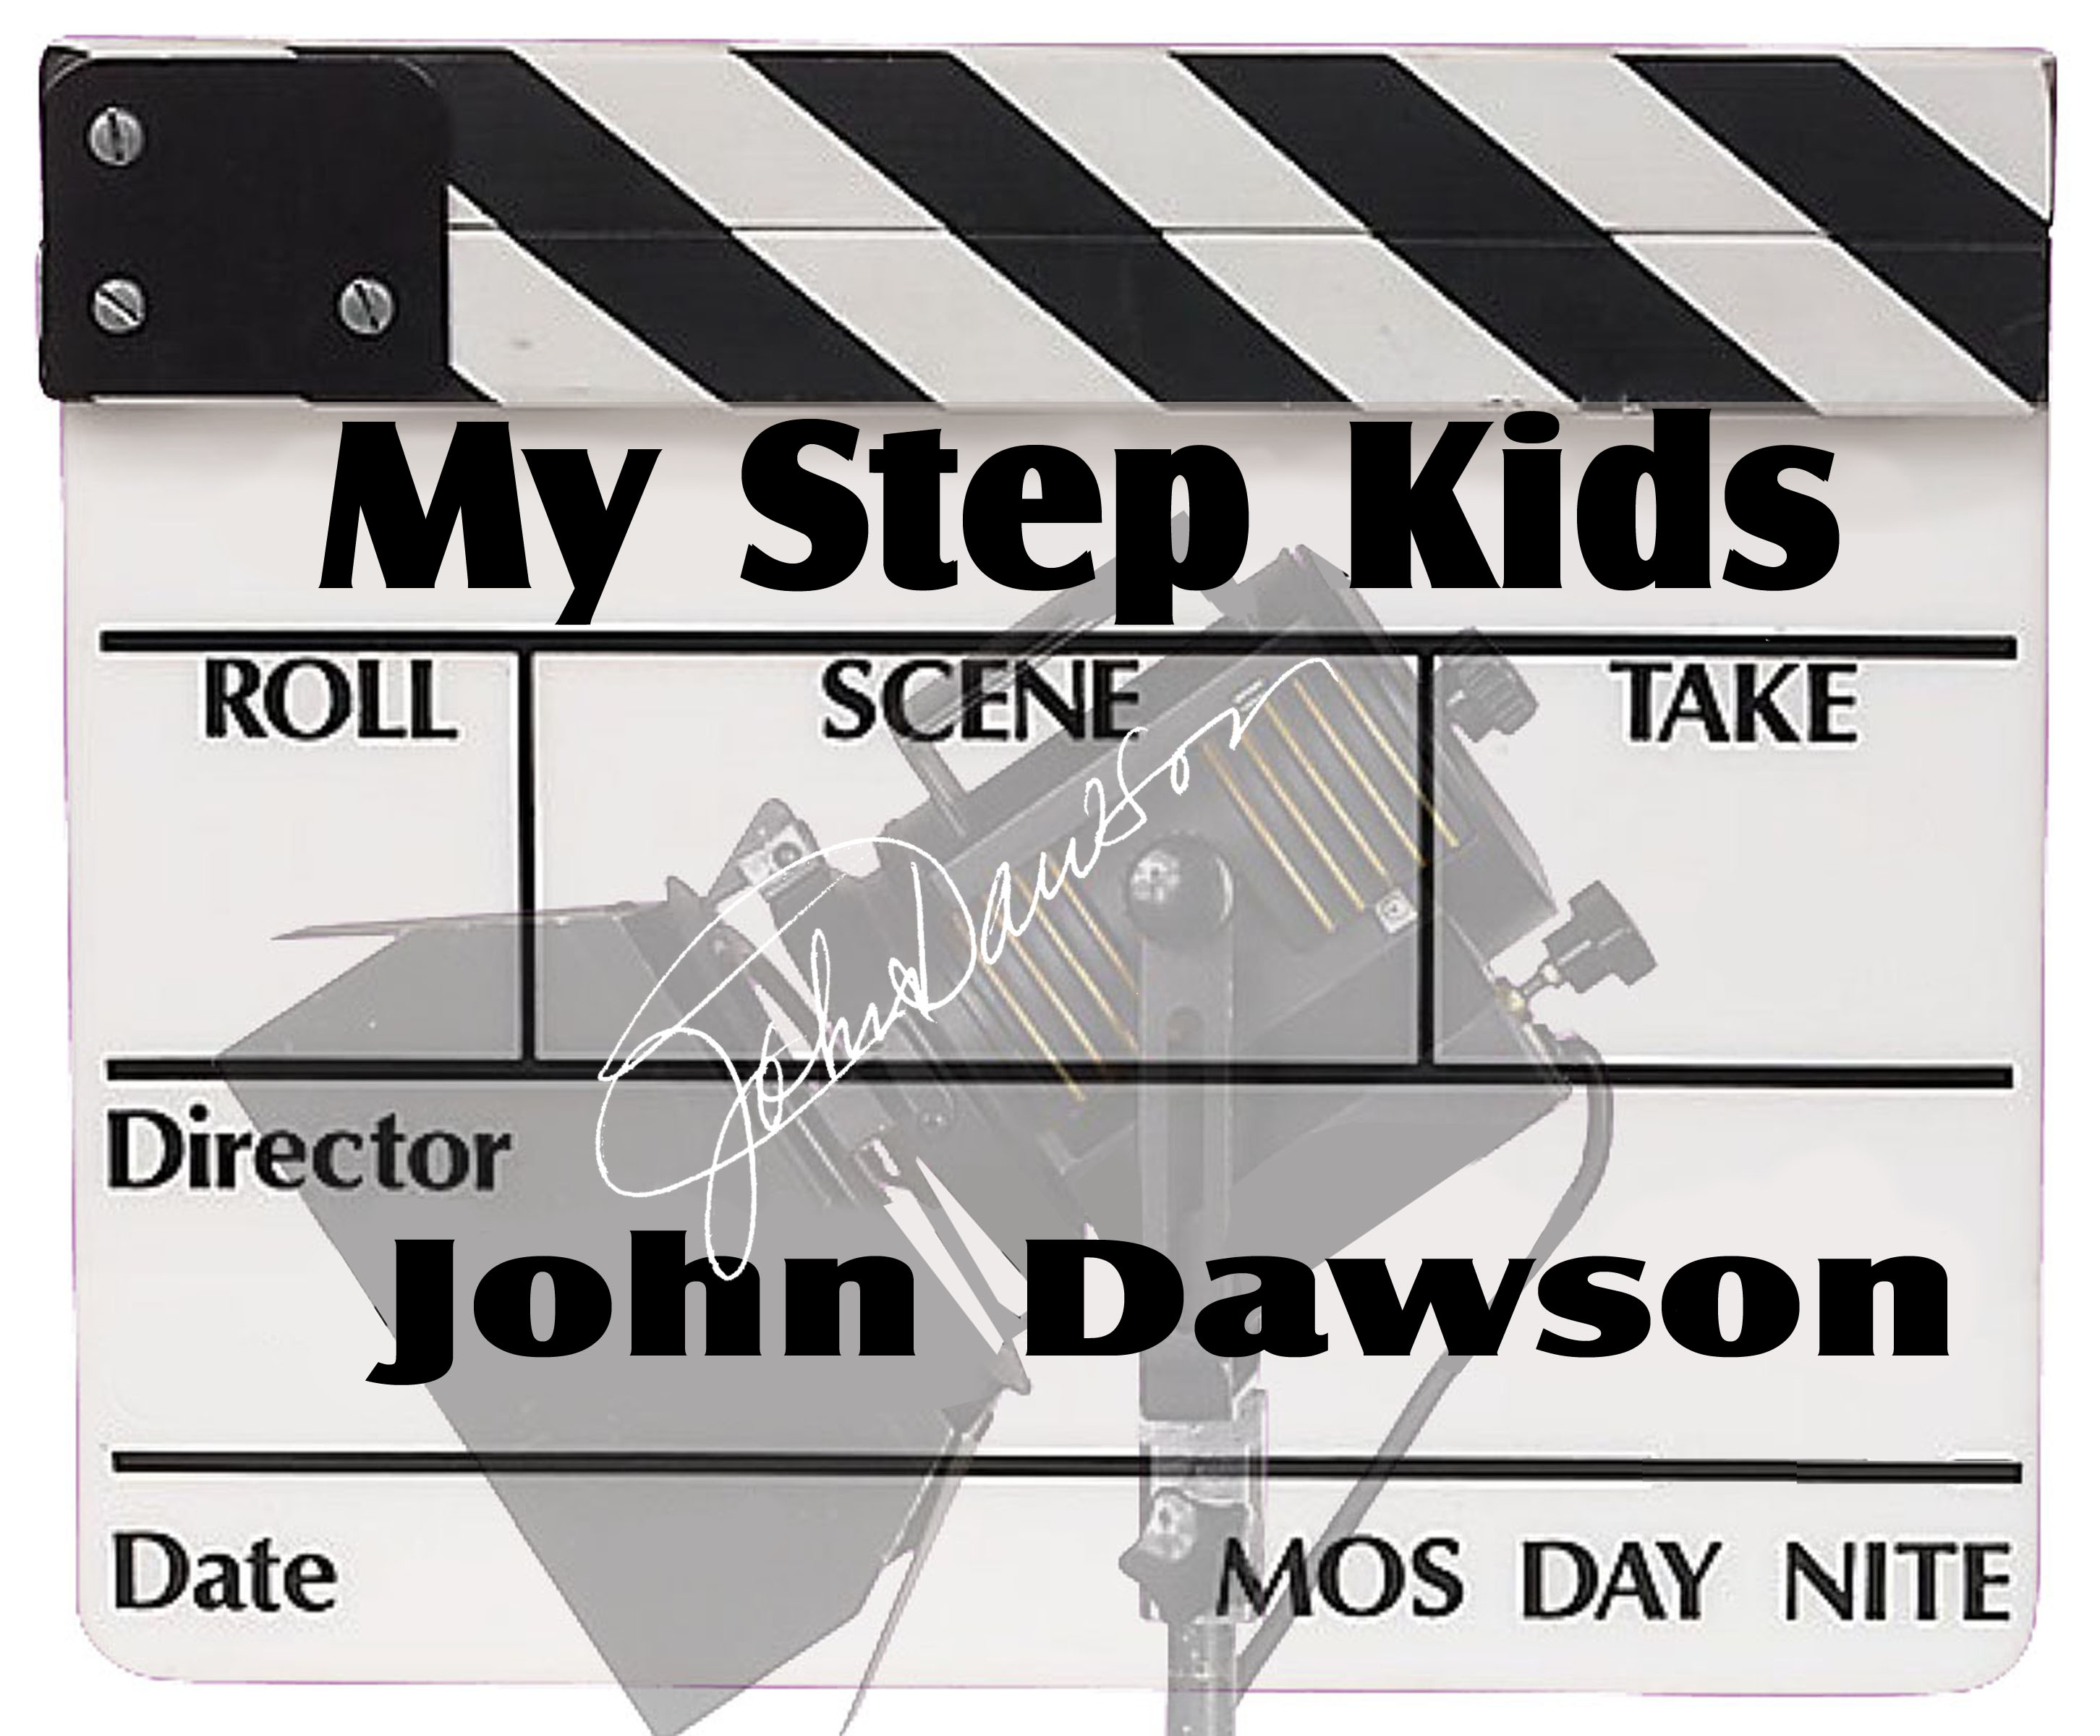 Clap board from the movie MY STEP KIDS